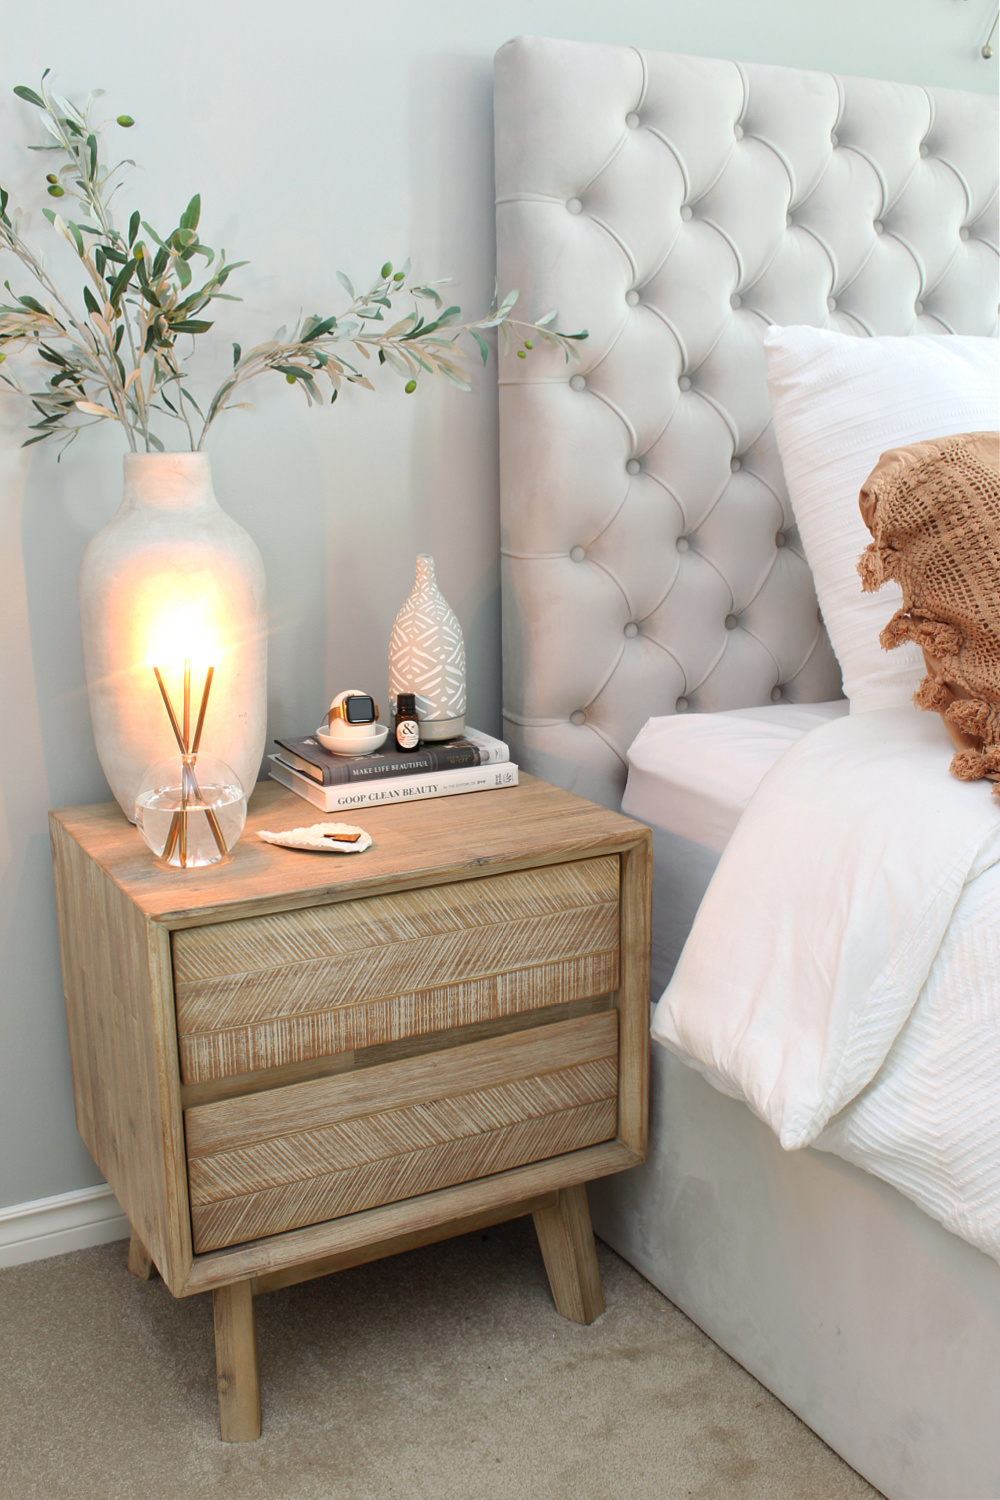 A nightstand with a candle next to an upholstered bed.